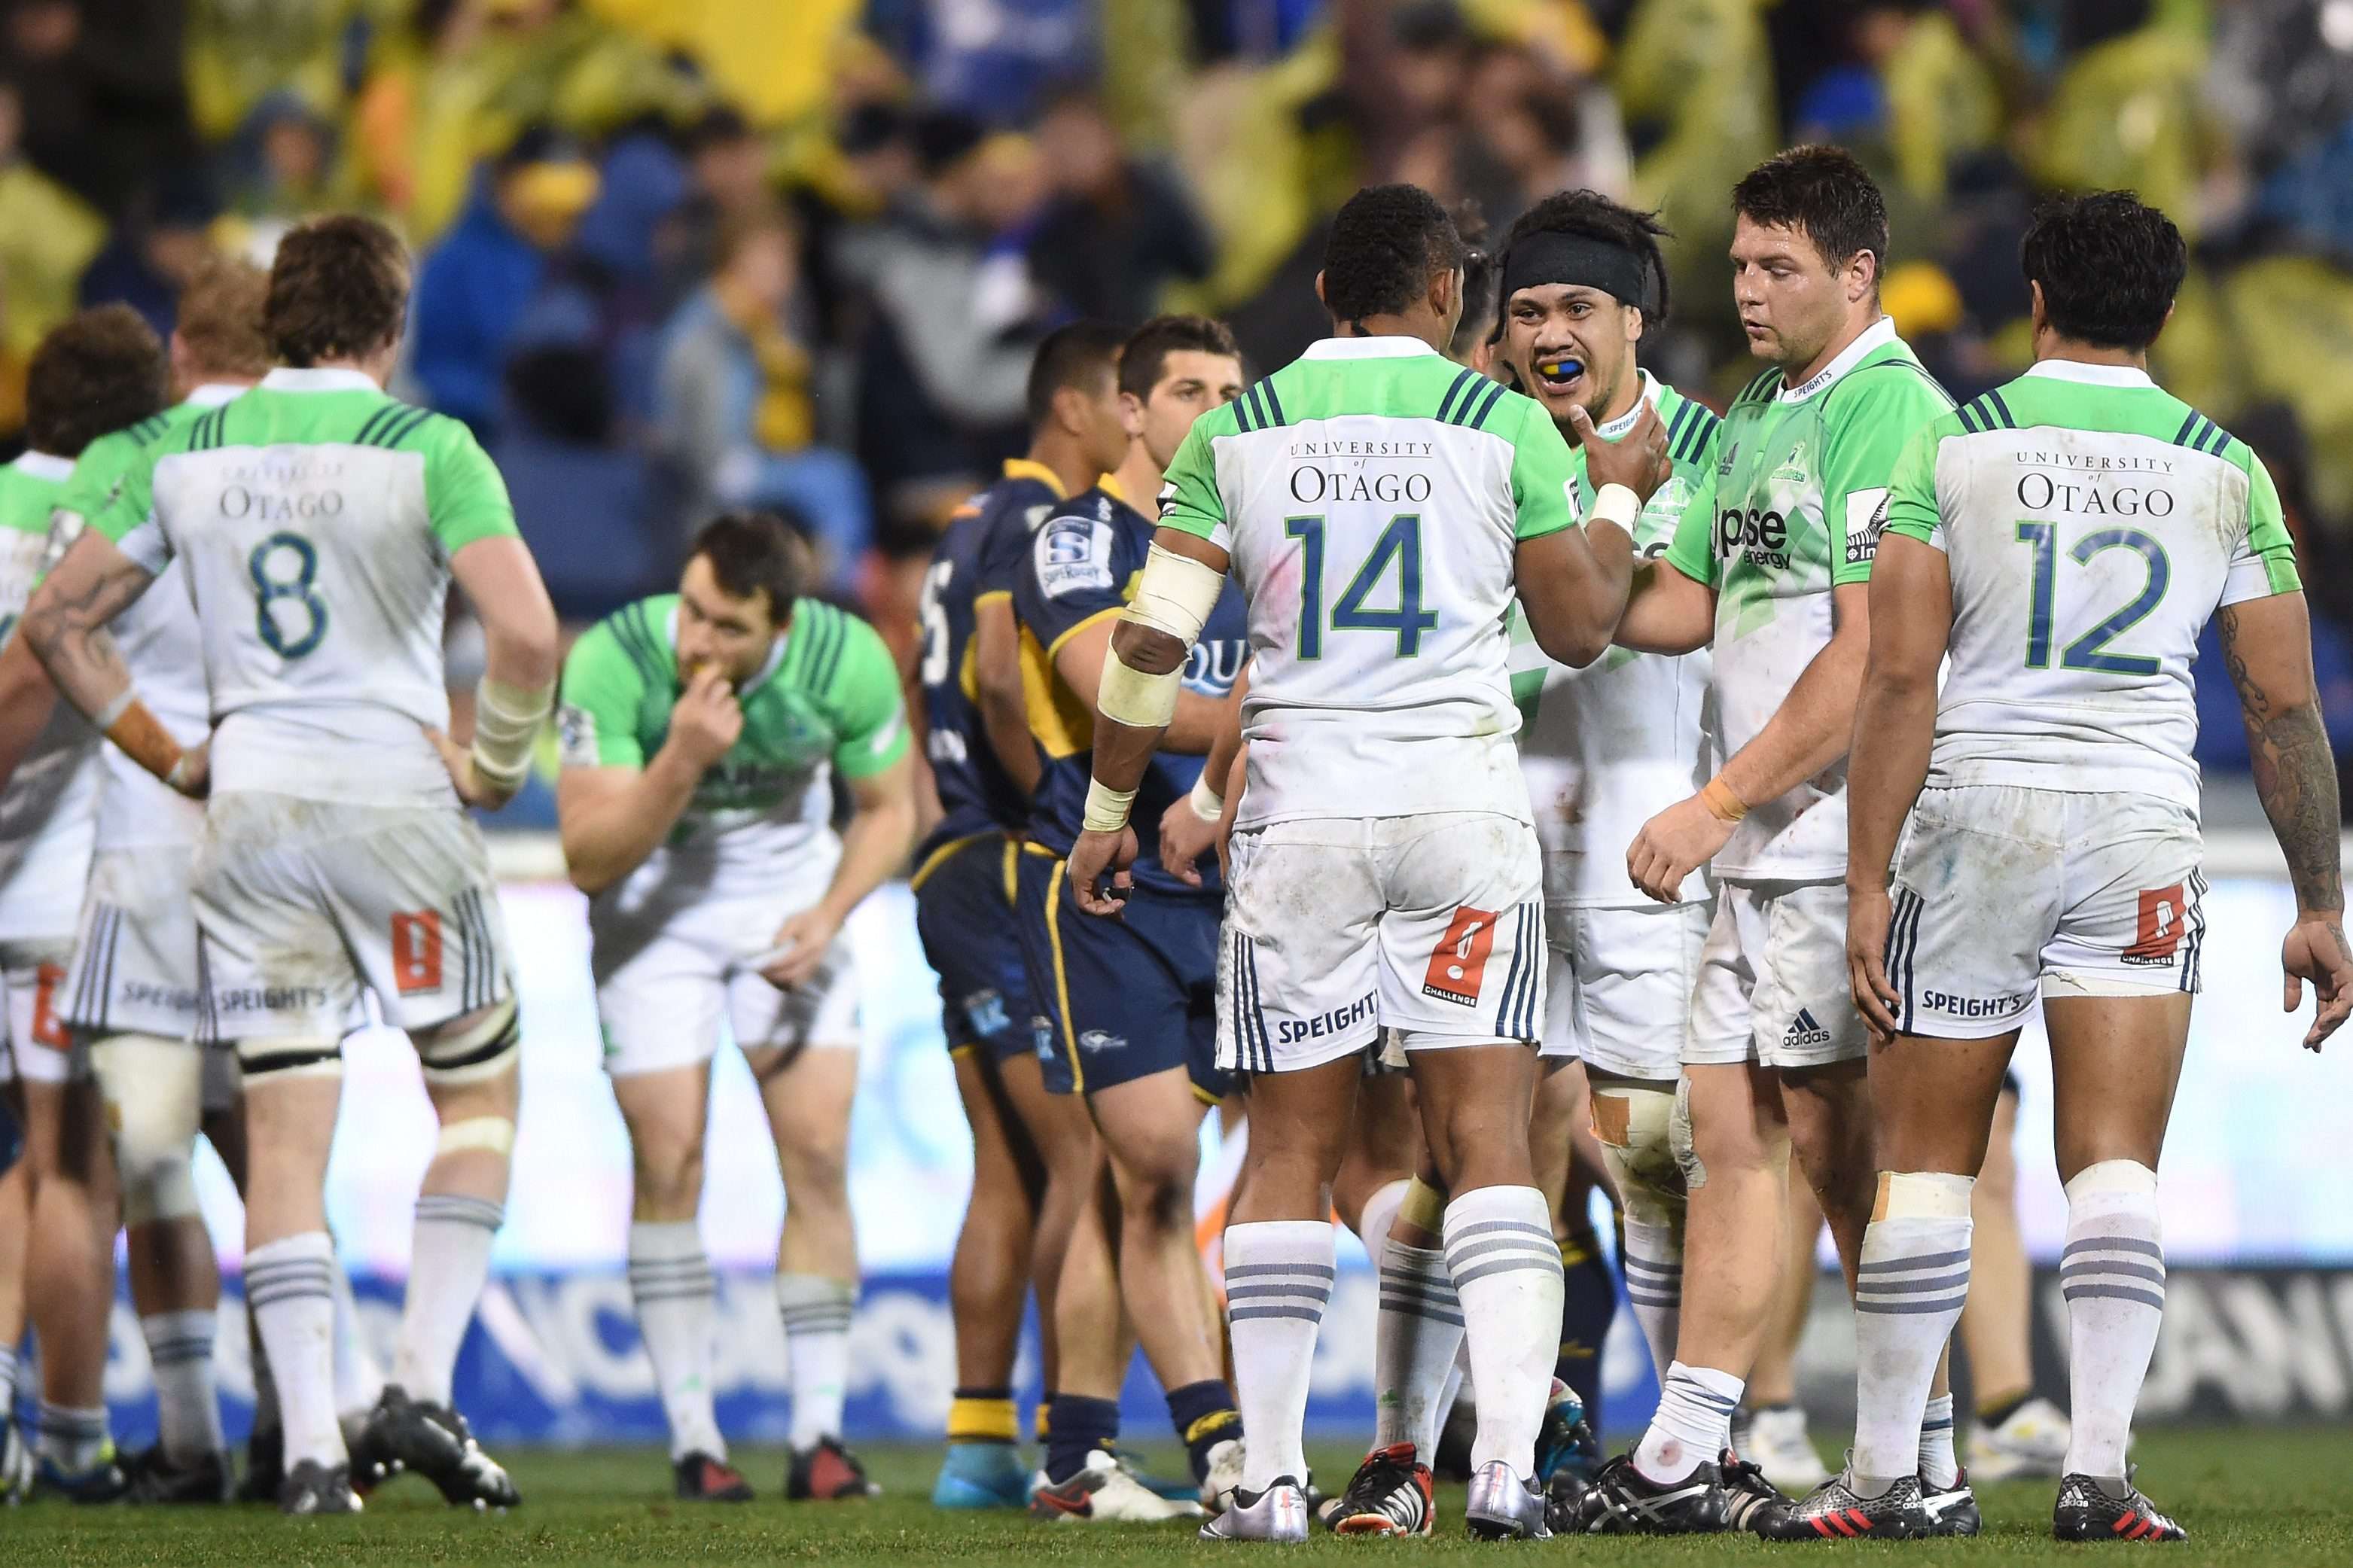 The Highlanders celebrate their win over the Brumbies on Firday. Photos: EPA